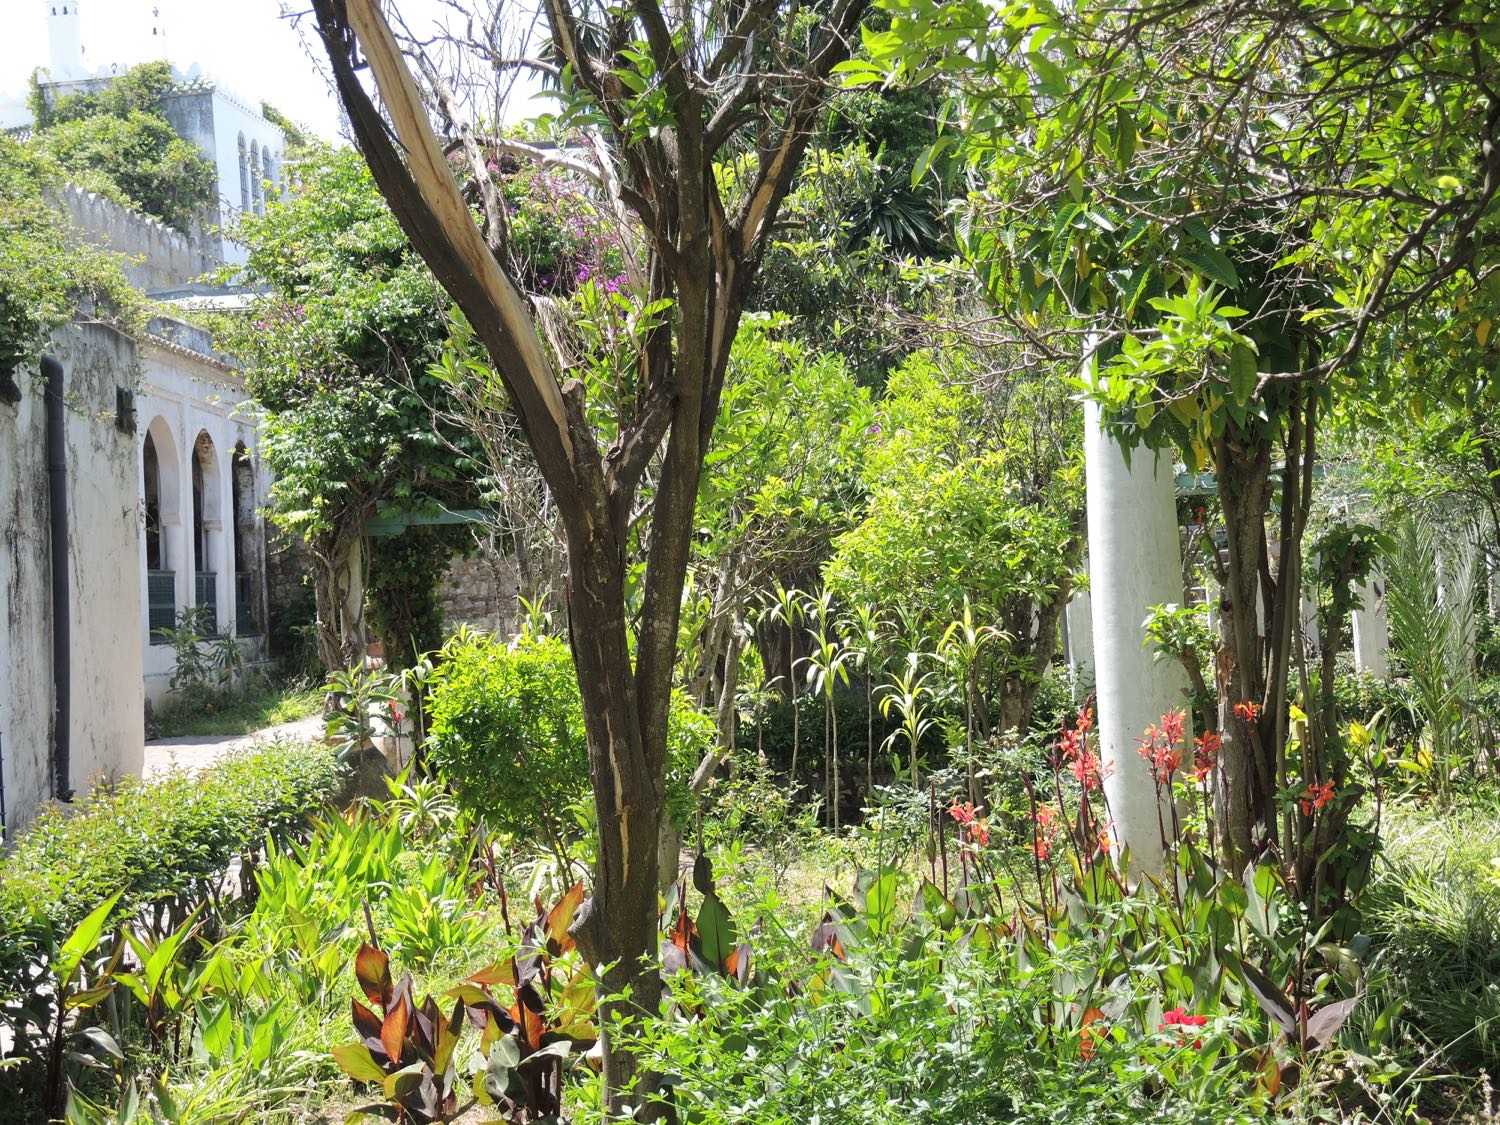 View of the Riad garden